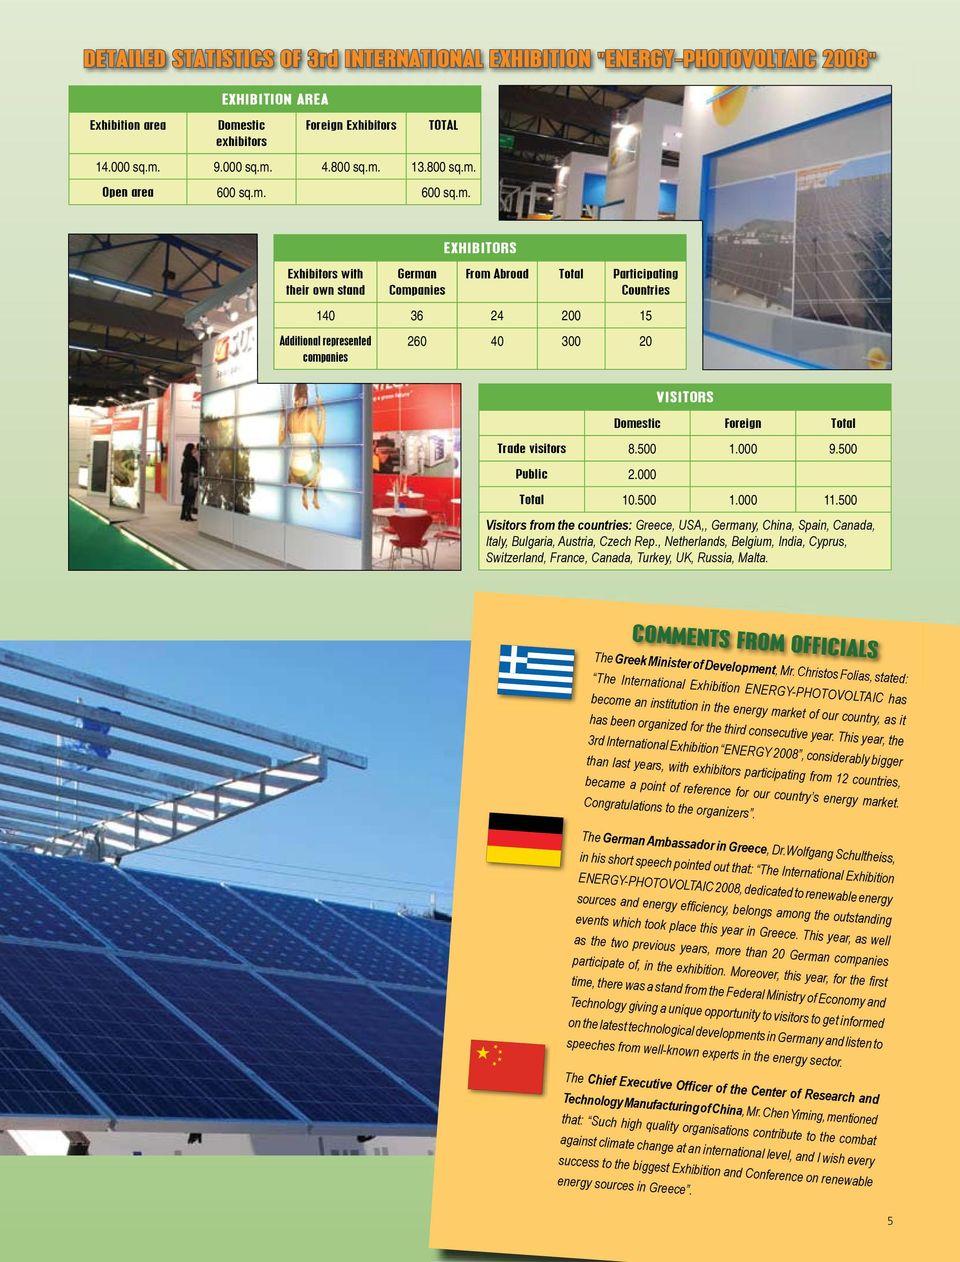 Wolfgang Schultheiss, in his short speech pointed out that: The International Exhibition ENERGY-PHOTOVOLTAIC 2008, dedicated to renewable energy sources and energy efficiency, belongs among the